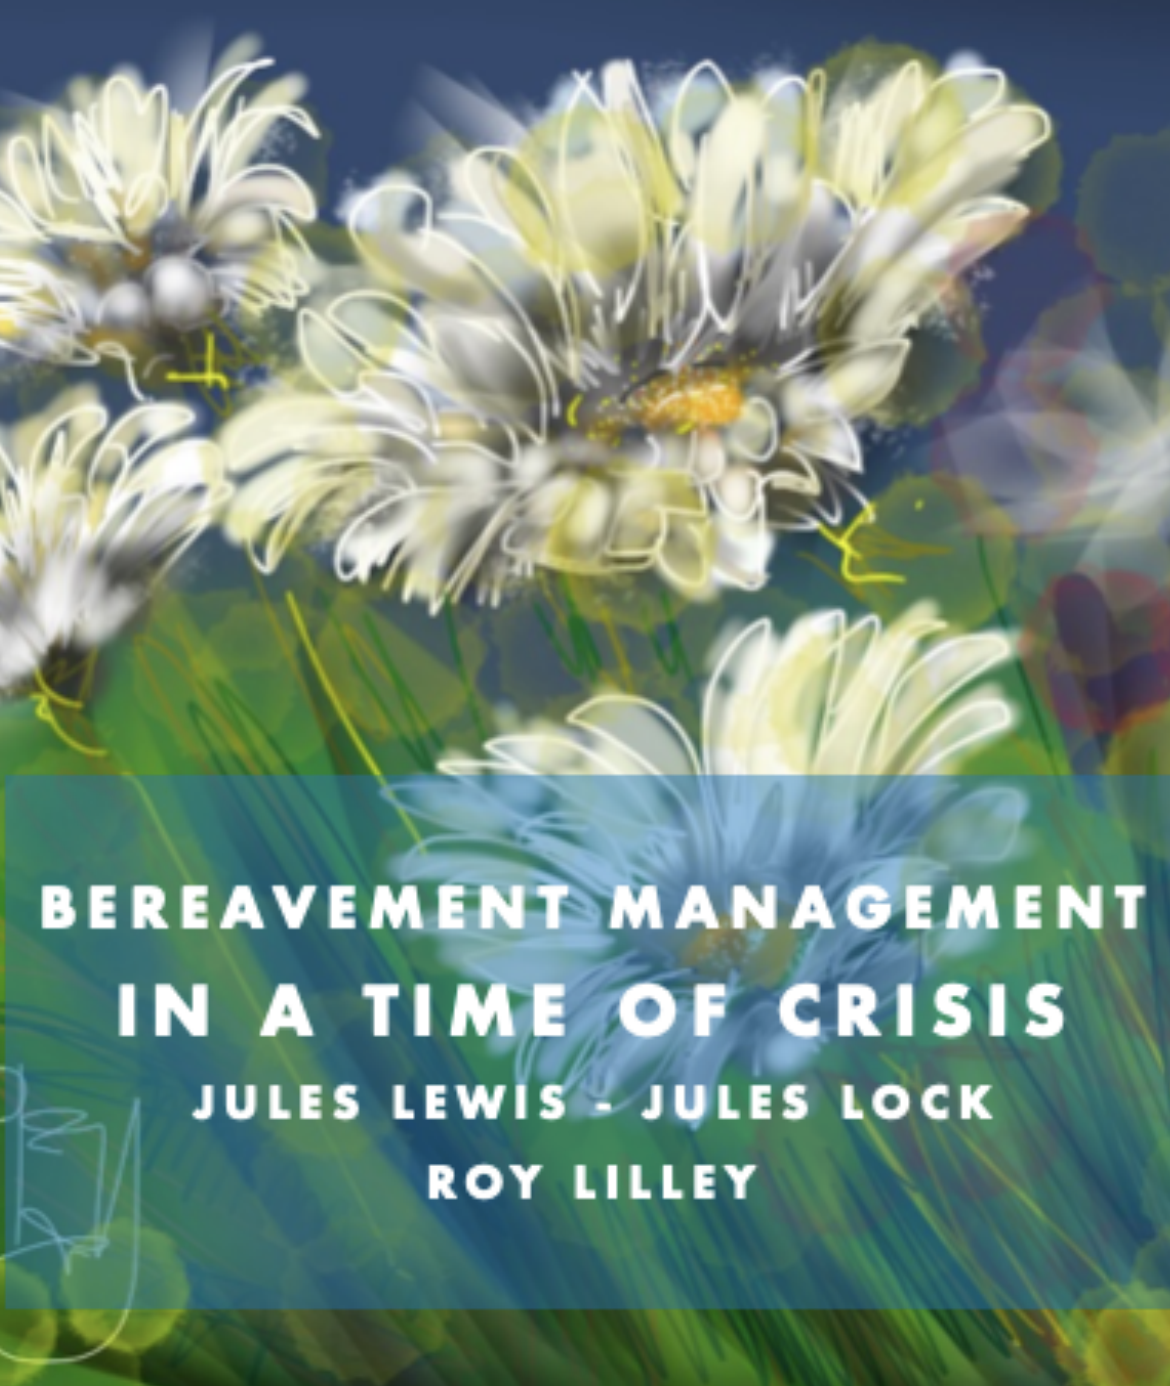 Bereavement Management in a Time of Crisis featured image